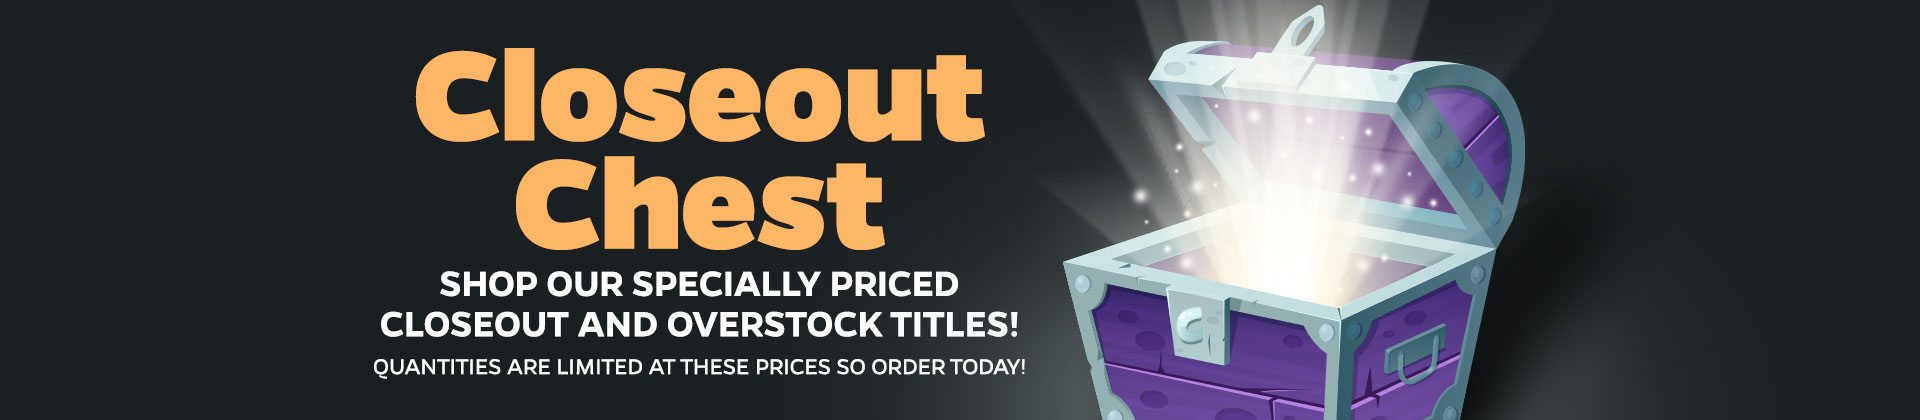 Closeout Chest